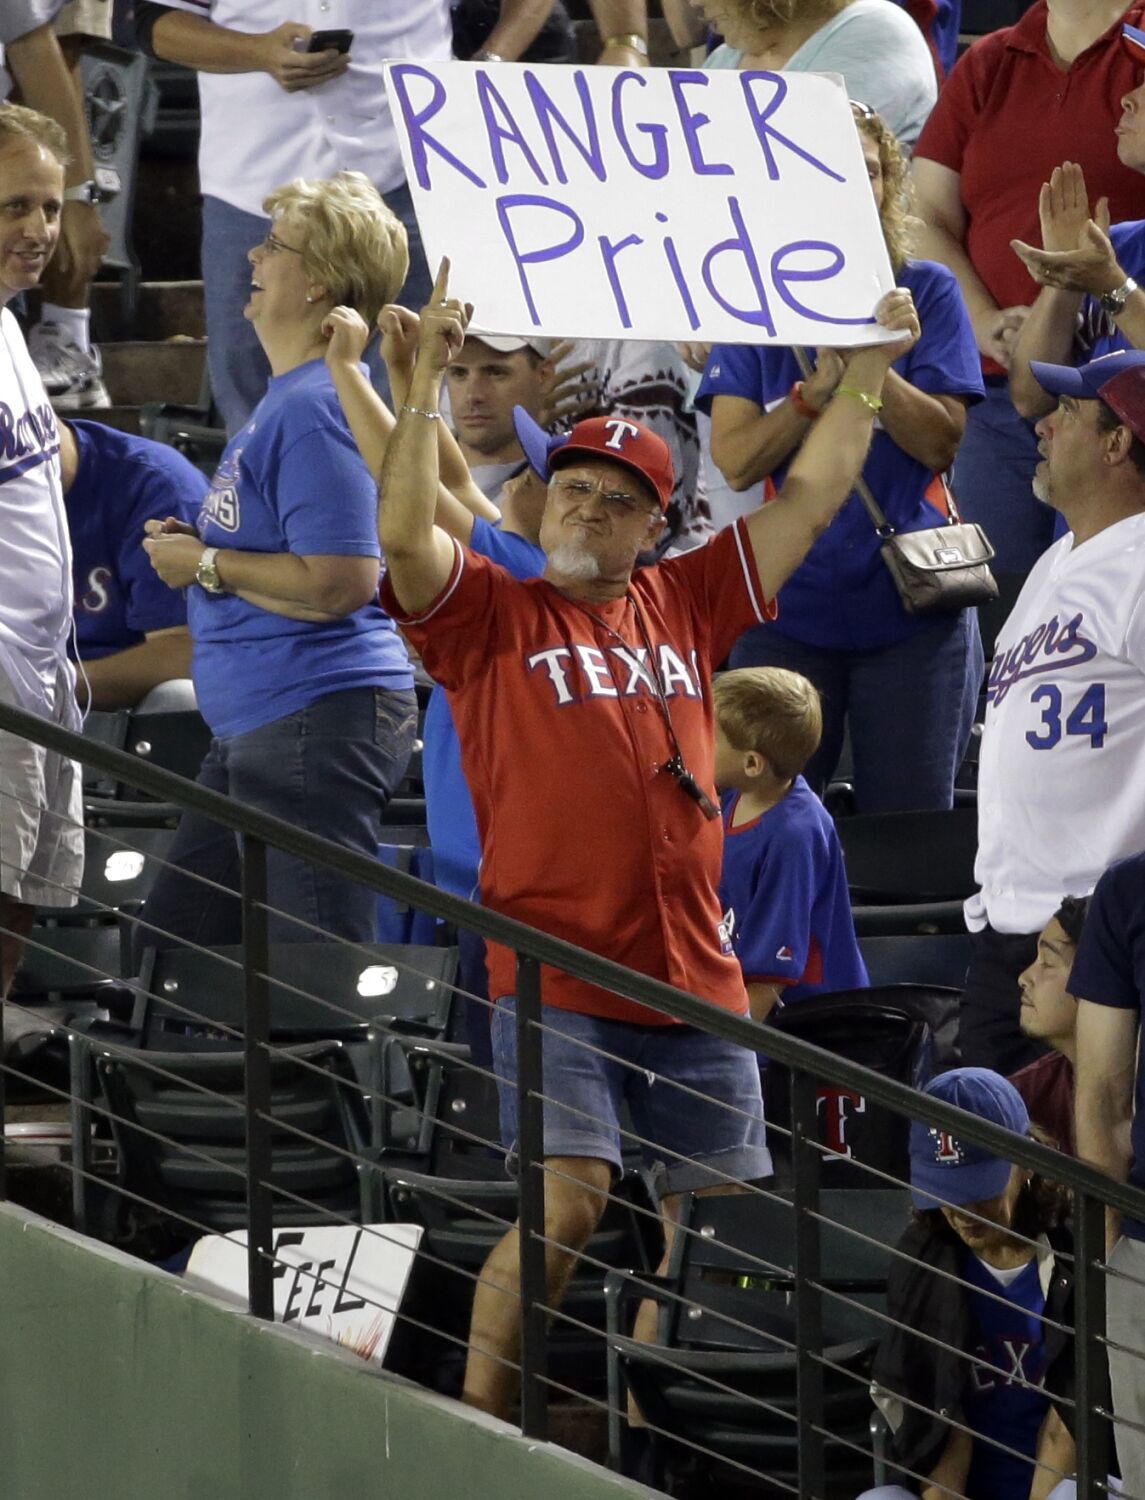 Texas Rangers are lone MLB team without a Pride Night